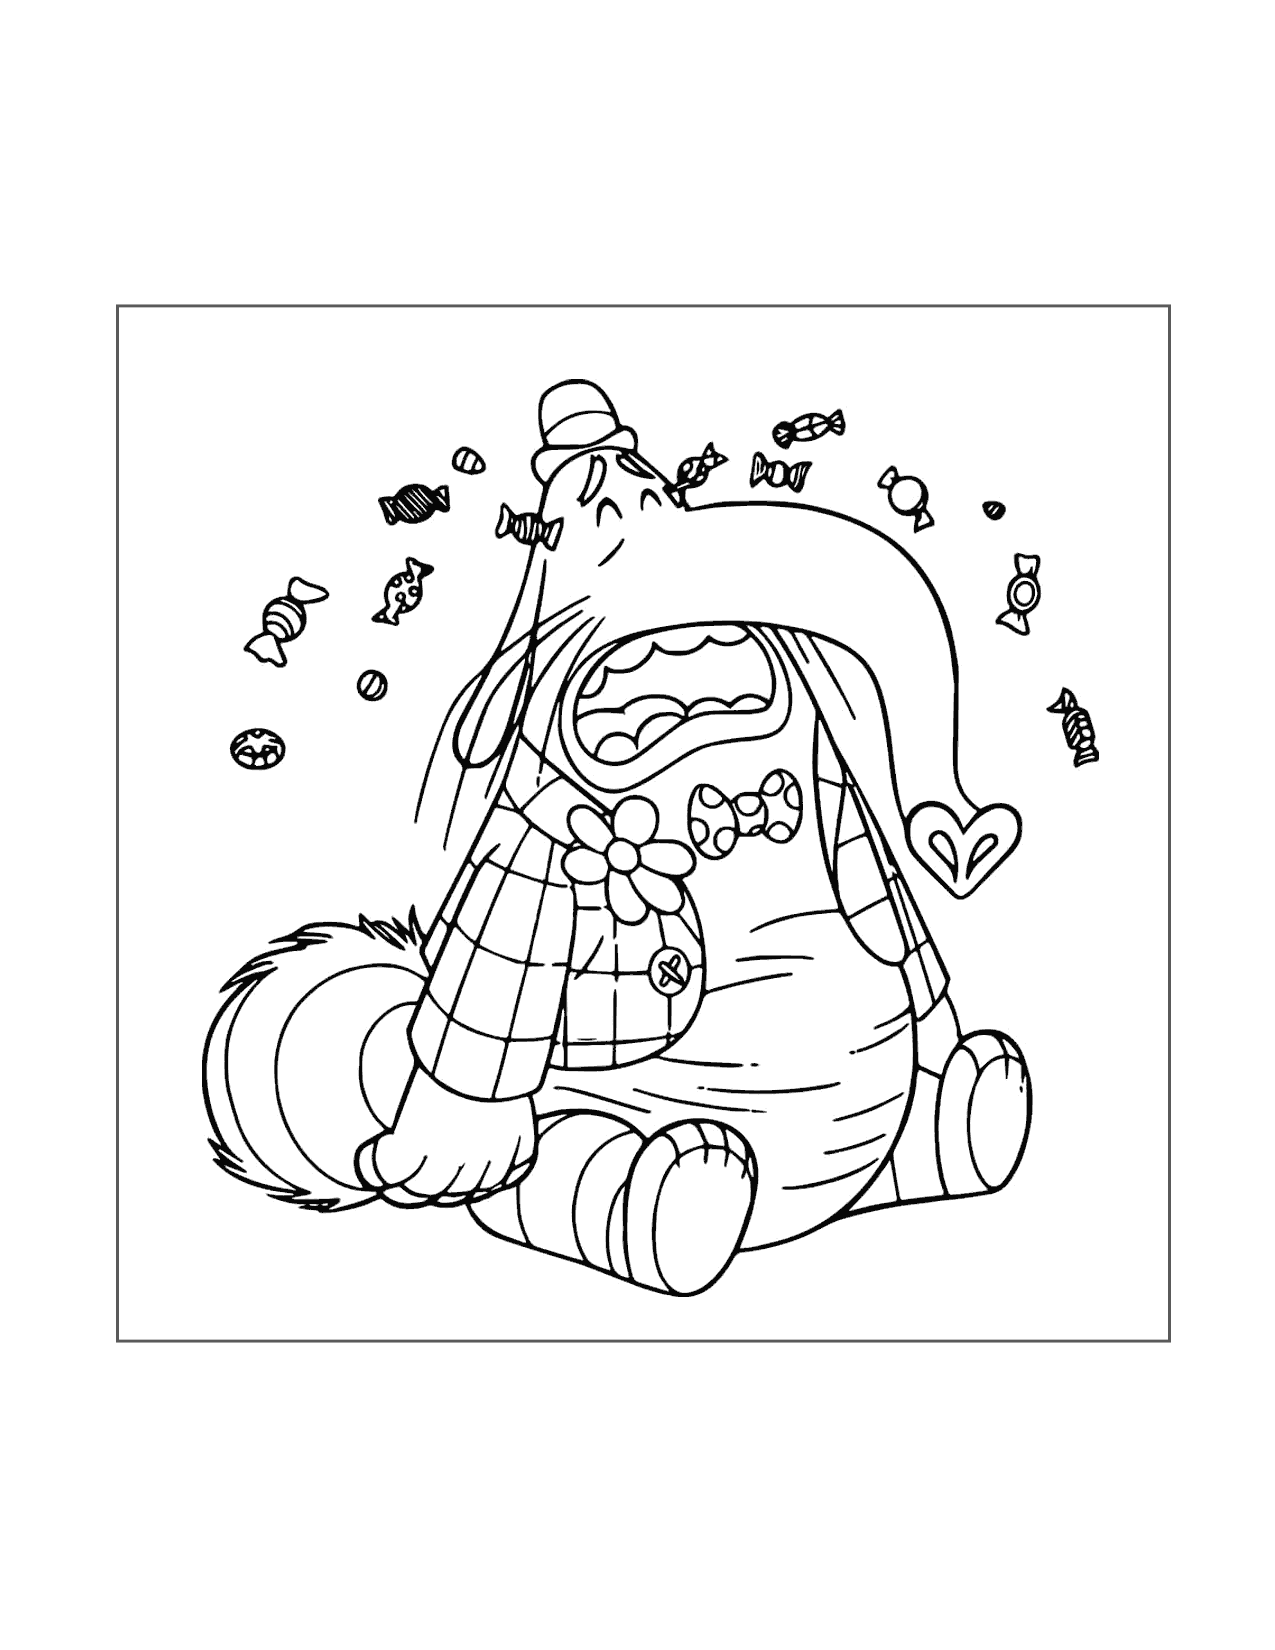 Poor Bing Bong Inside Out Coloring Page